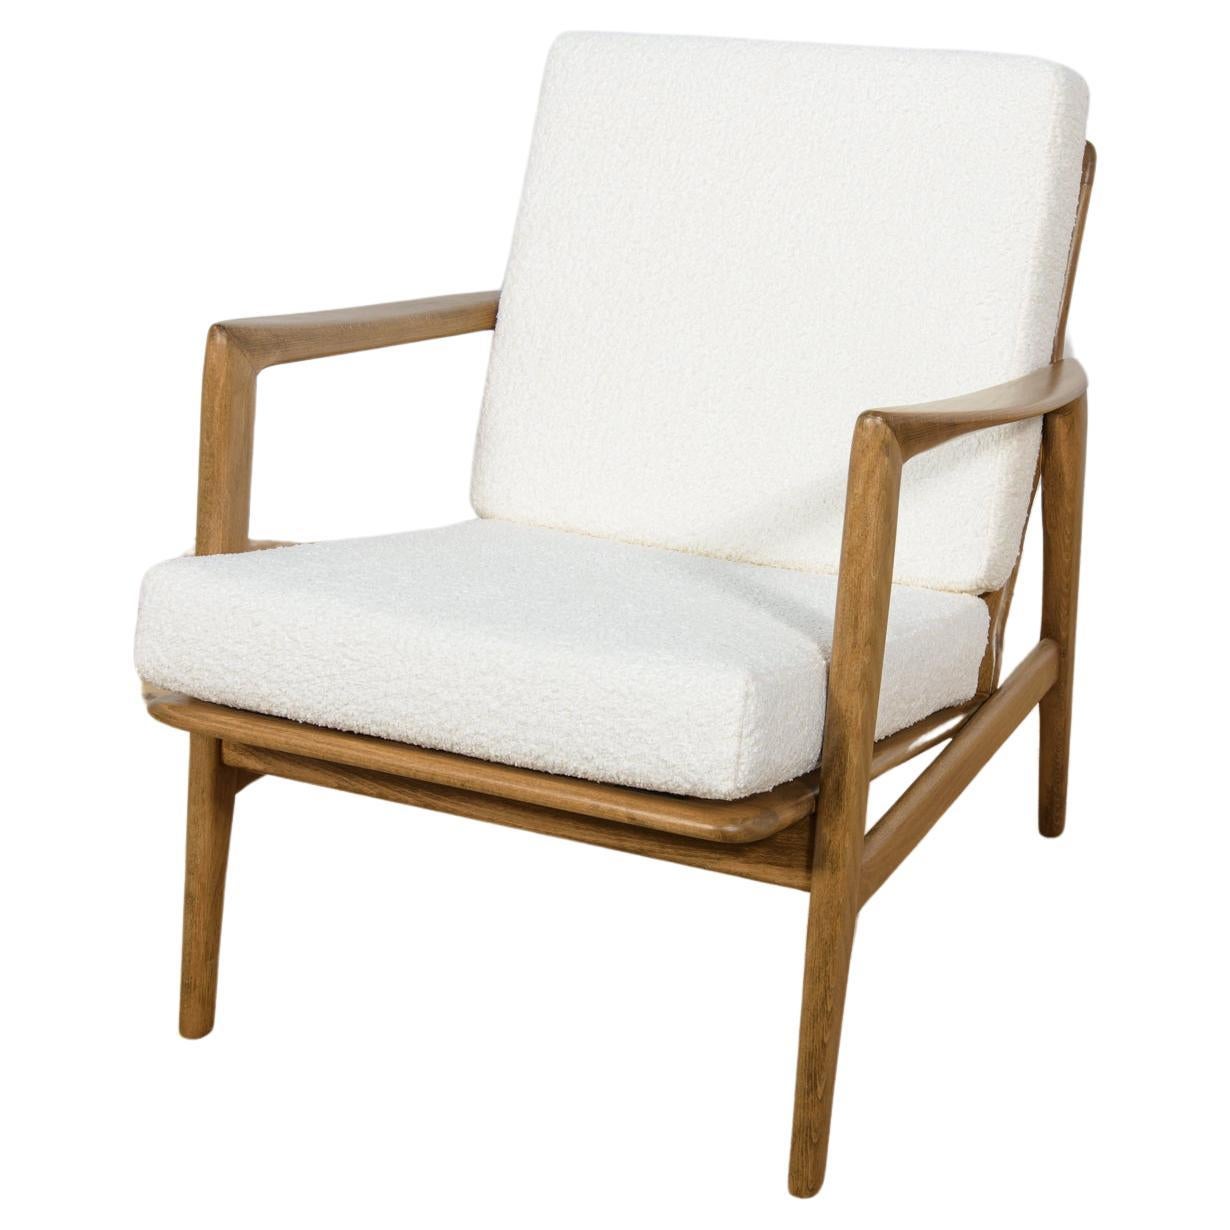 Mid-Century Model 300-139 Armchair from Swarzędz Factory, 1960s For Sale